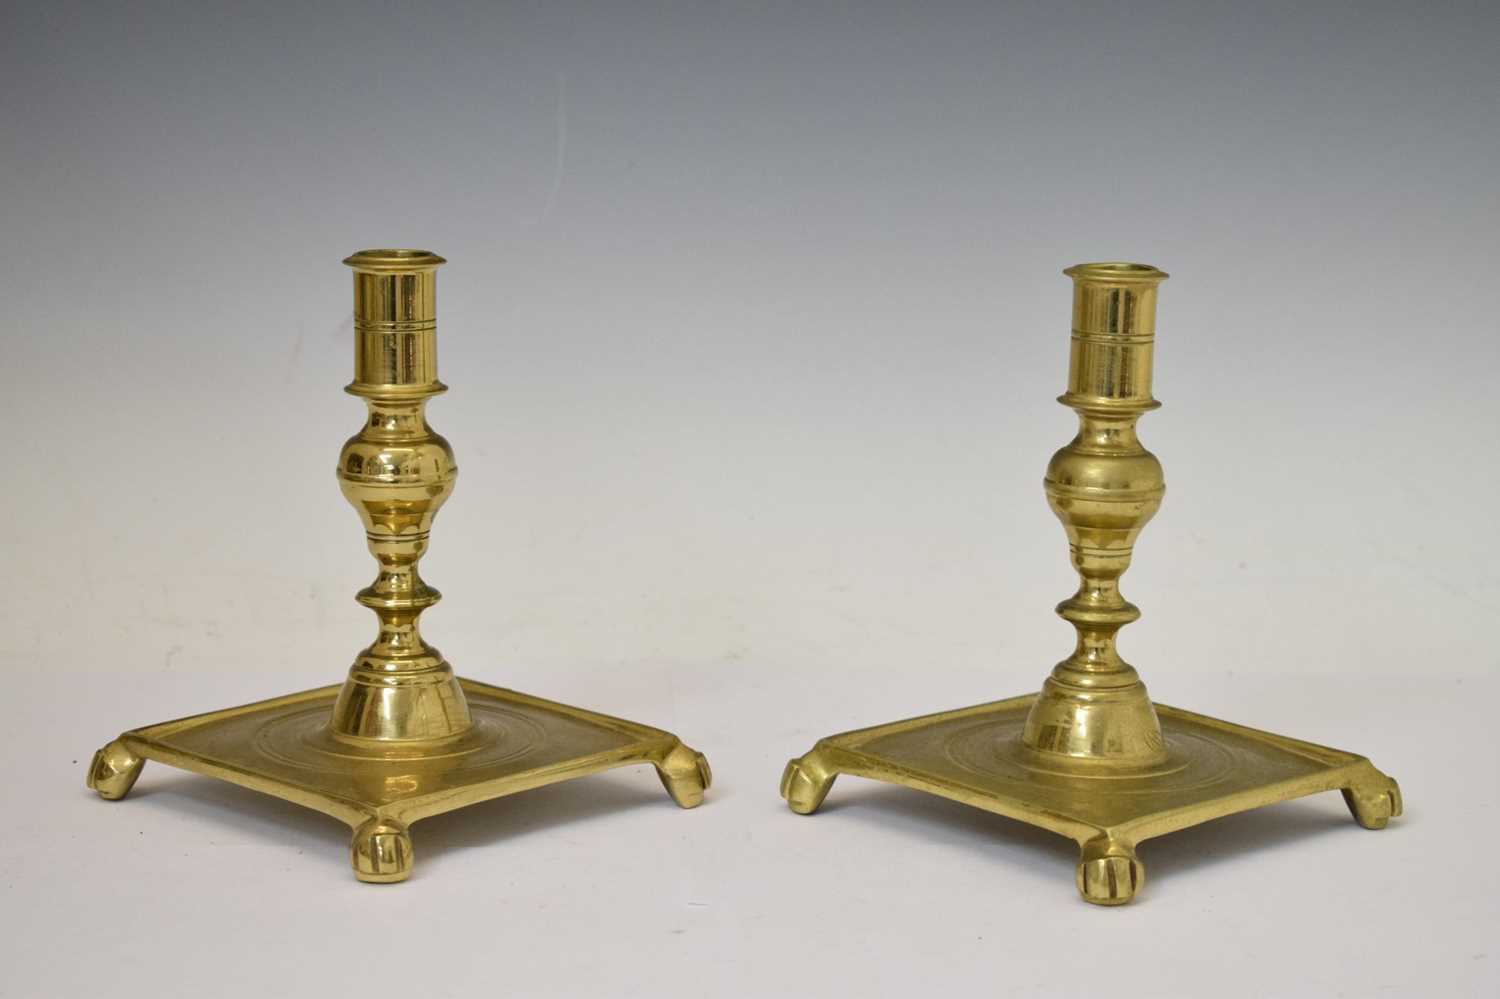 Four turned brass candlesticks - Image 2 of 5